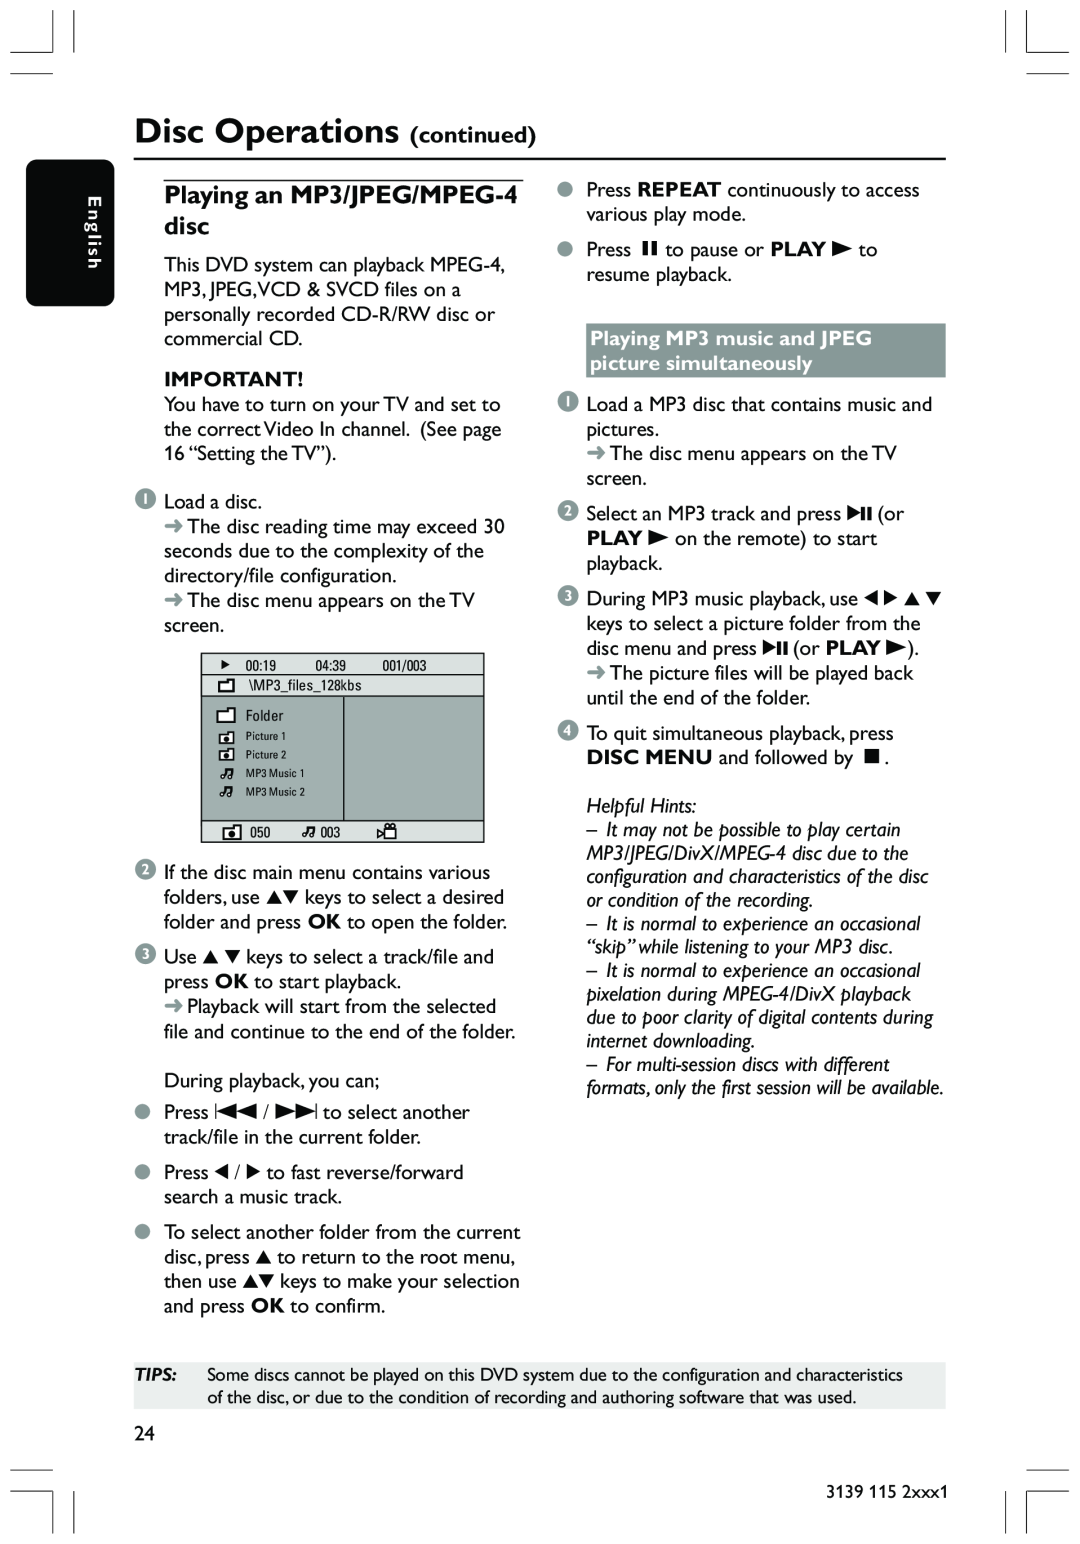 Philips HTS3300 user manual Playing an MP3/JPEG/MPEG-4disc, Disc Operations continued, Helpful Hints 